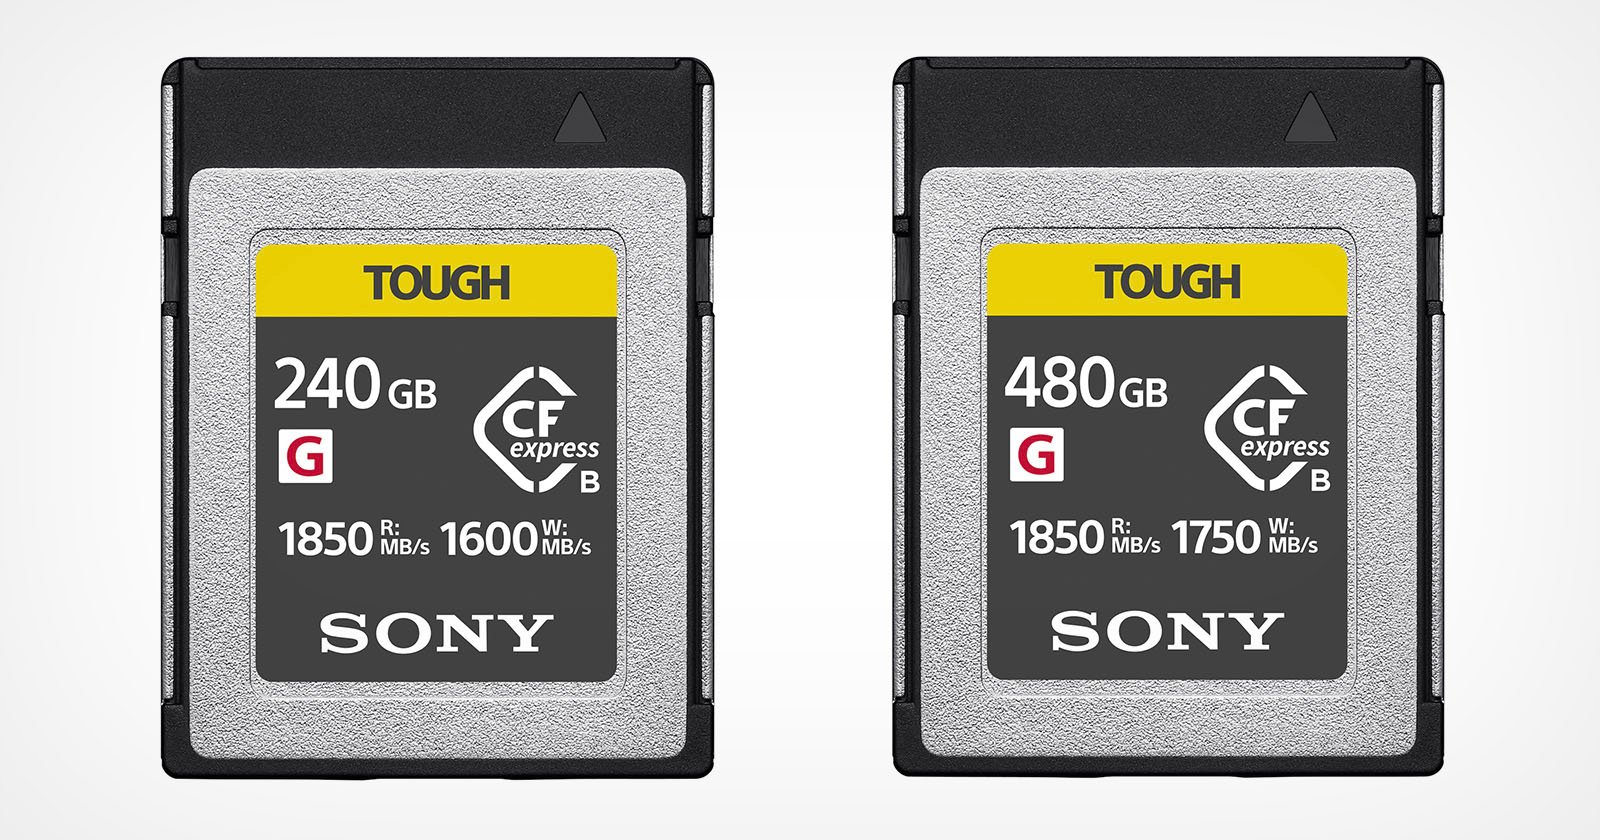  sony tough cfexpress type cards are fast 